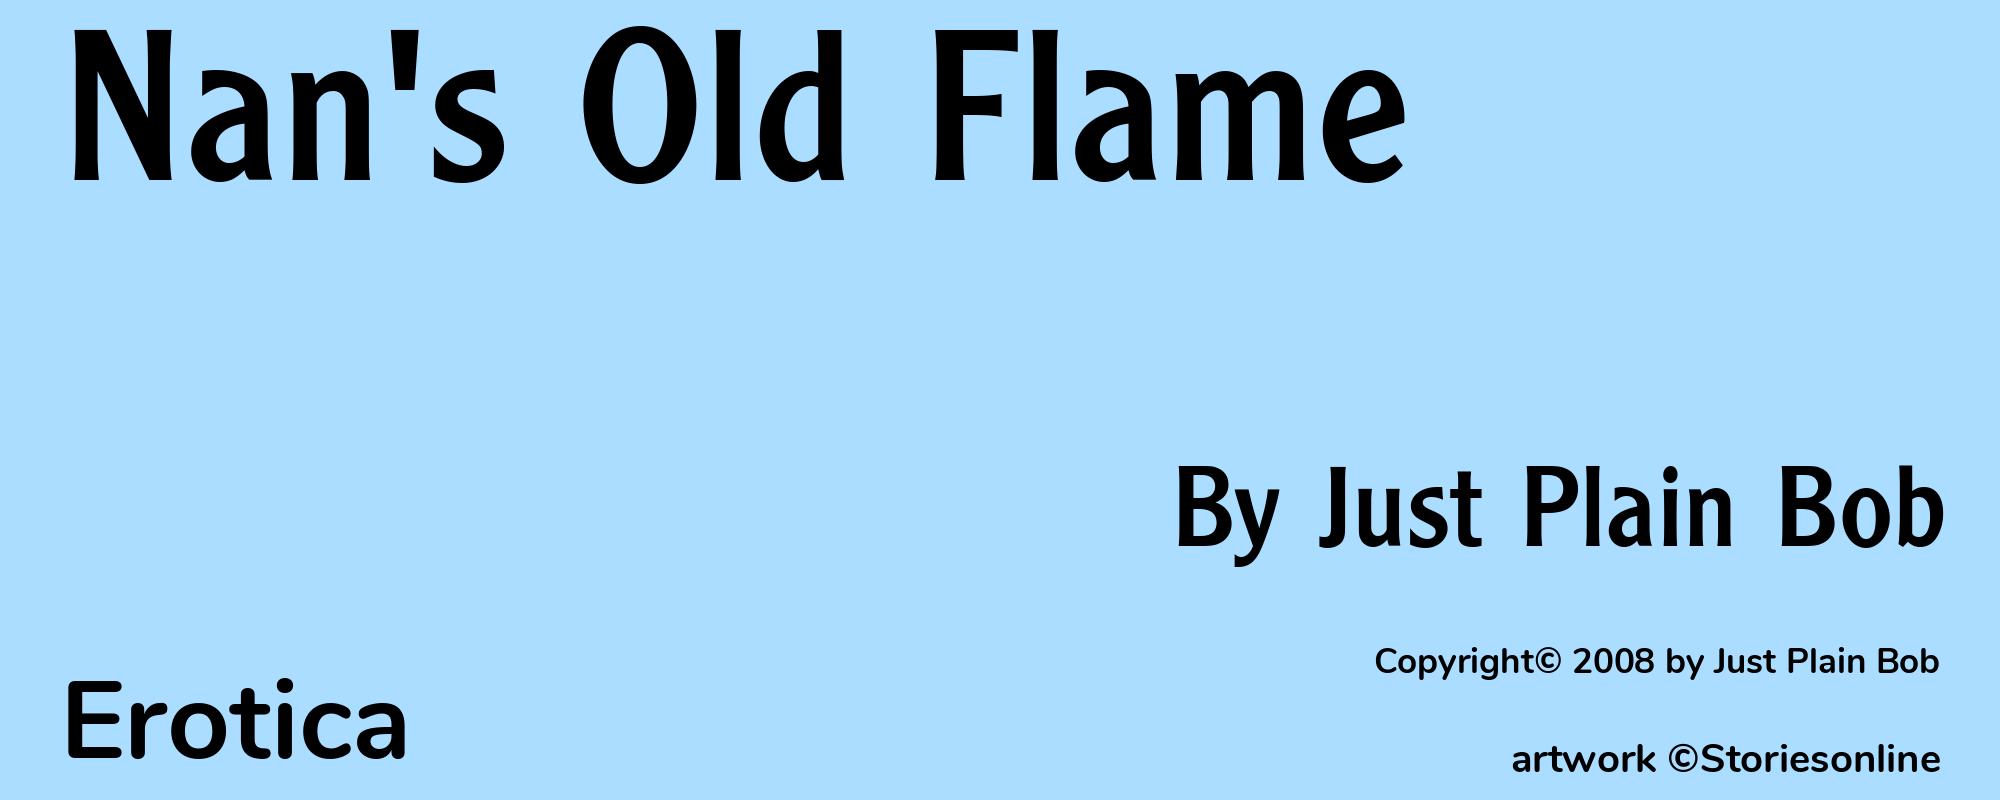 Nan's Old Flame - Cover